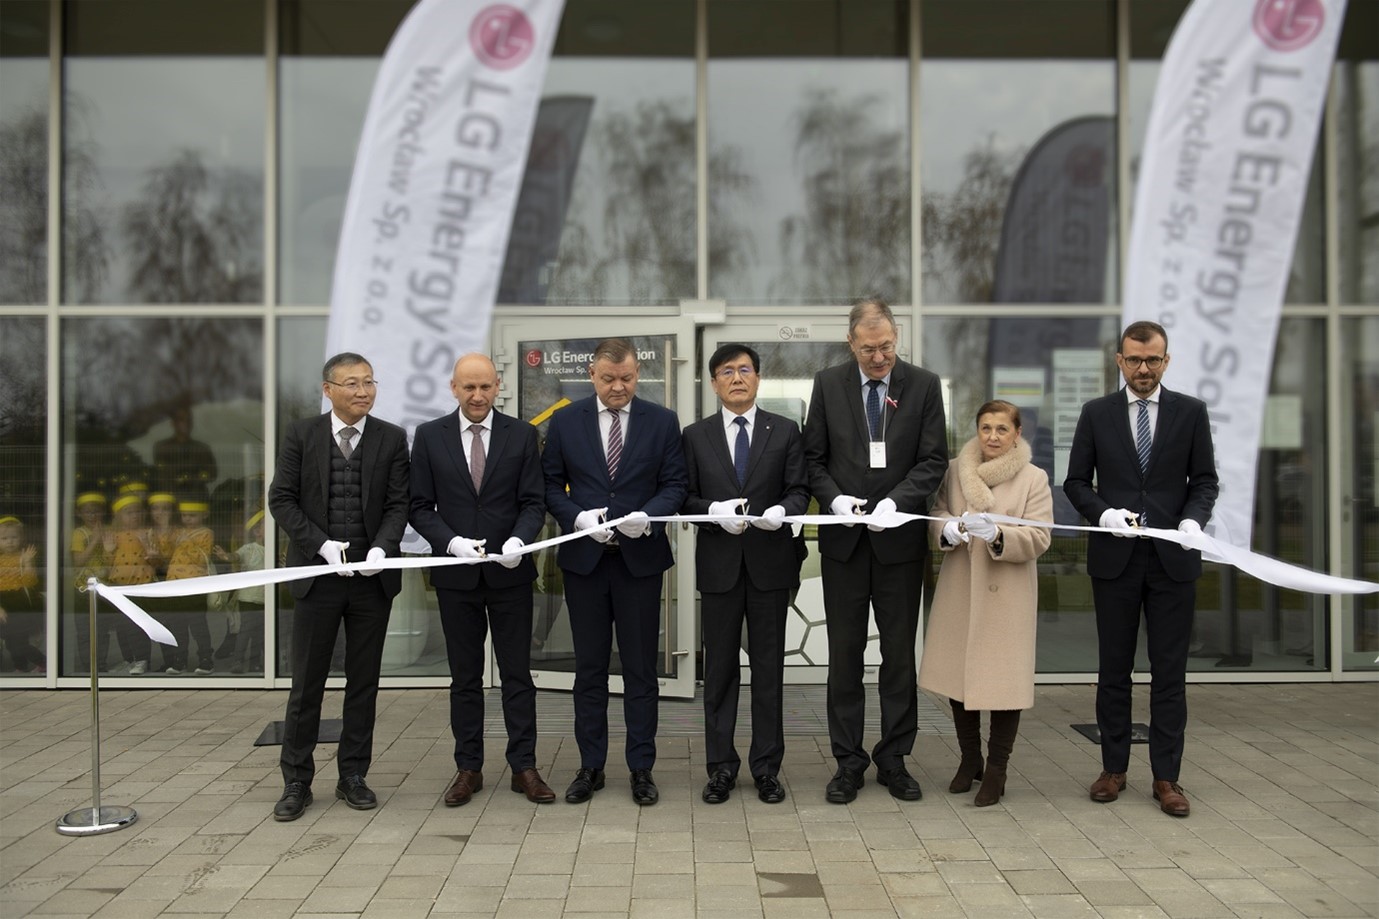 lg-energy-solution-wroclaw-opens-daycare-center-for-employees-community_2.jpg